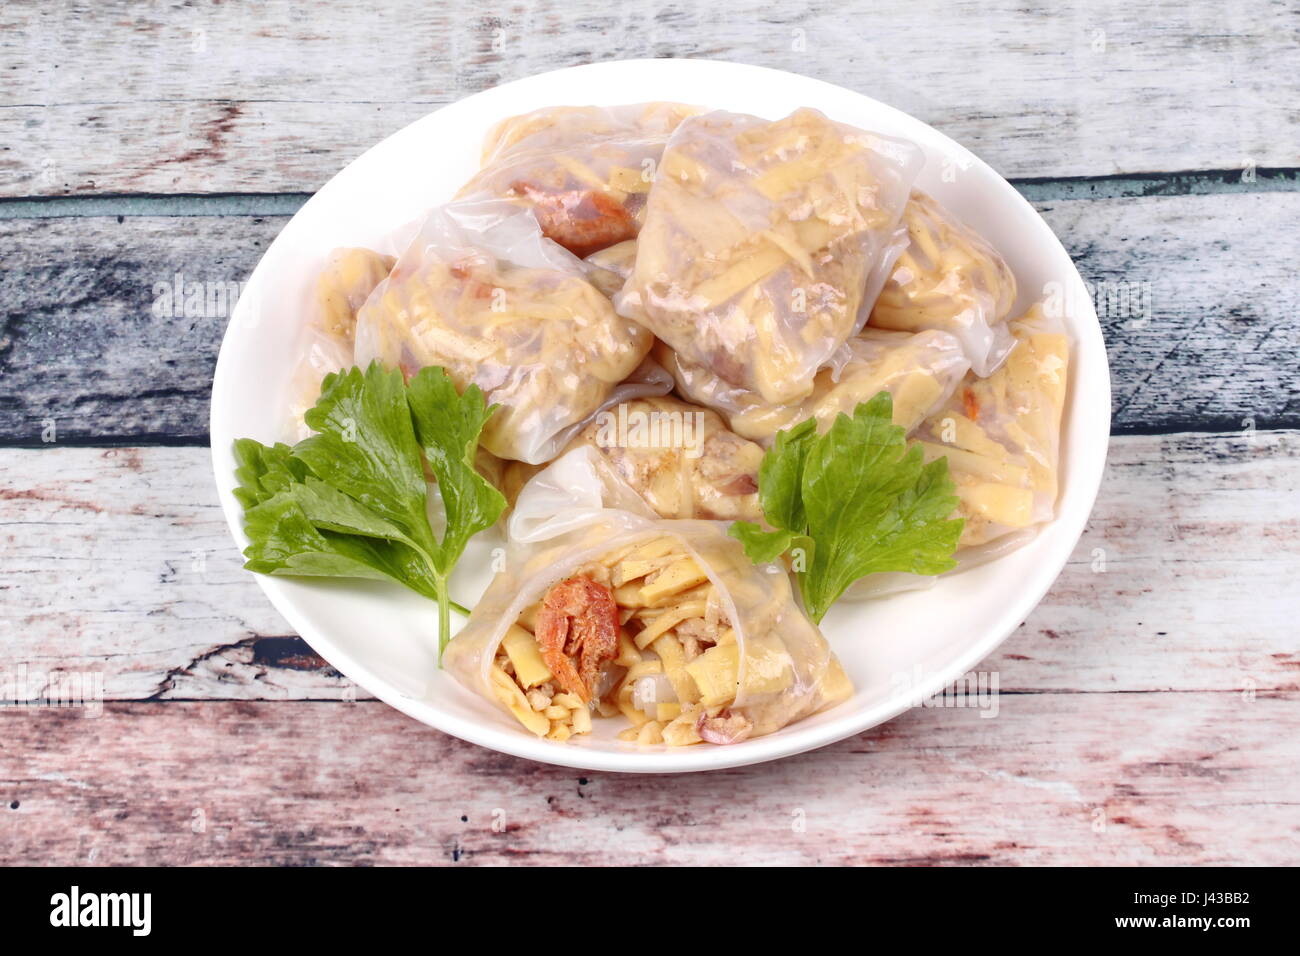 Chinese dessert, Steamed Dumpling stuffed with fried soft bamboo pole shoots,dried shrime and mined pork . Stock Photo